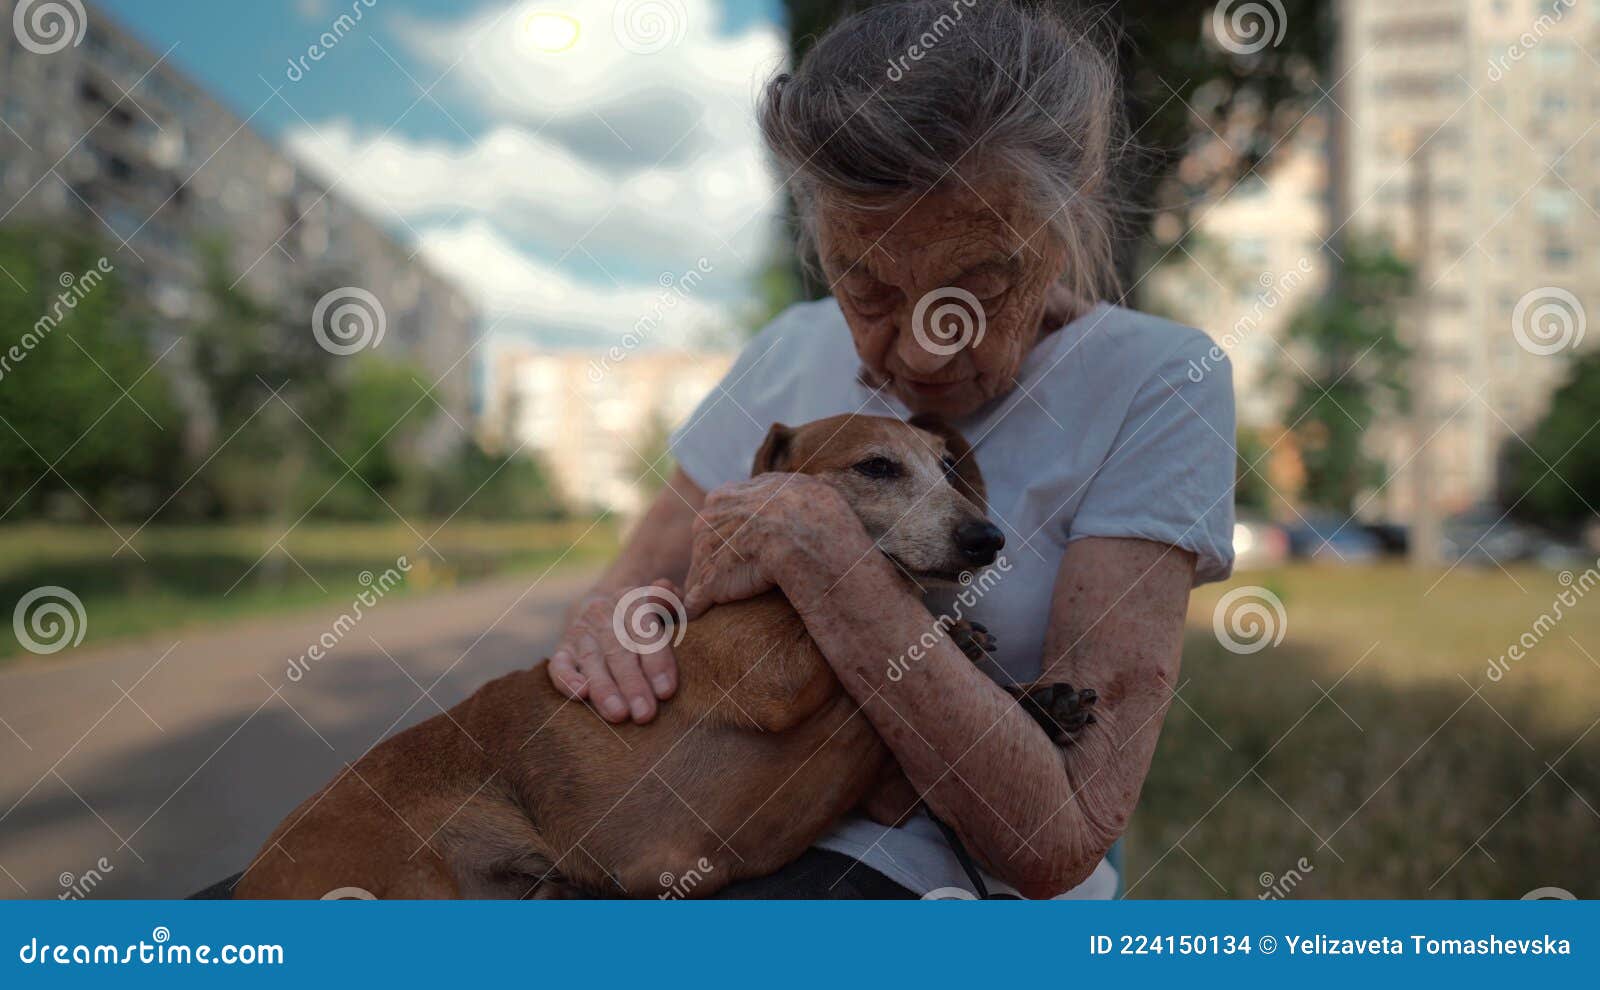 animal theme is a lonely old woman best friend. caucasian 90 years old senior female is happy to spend time with her pet